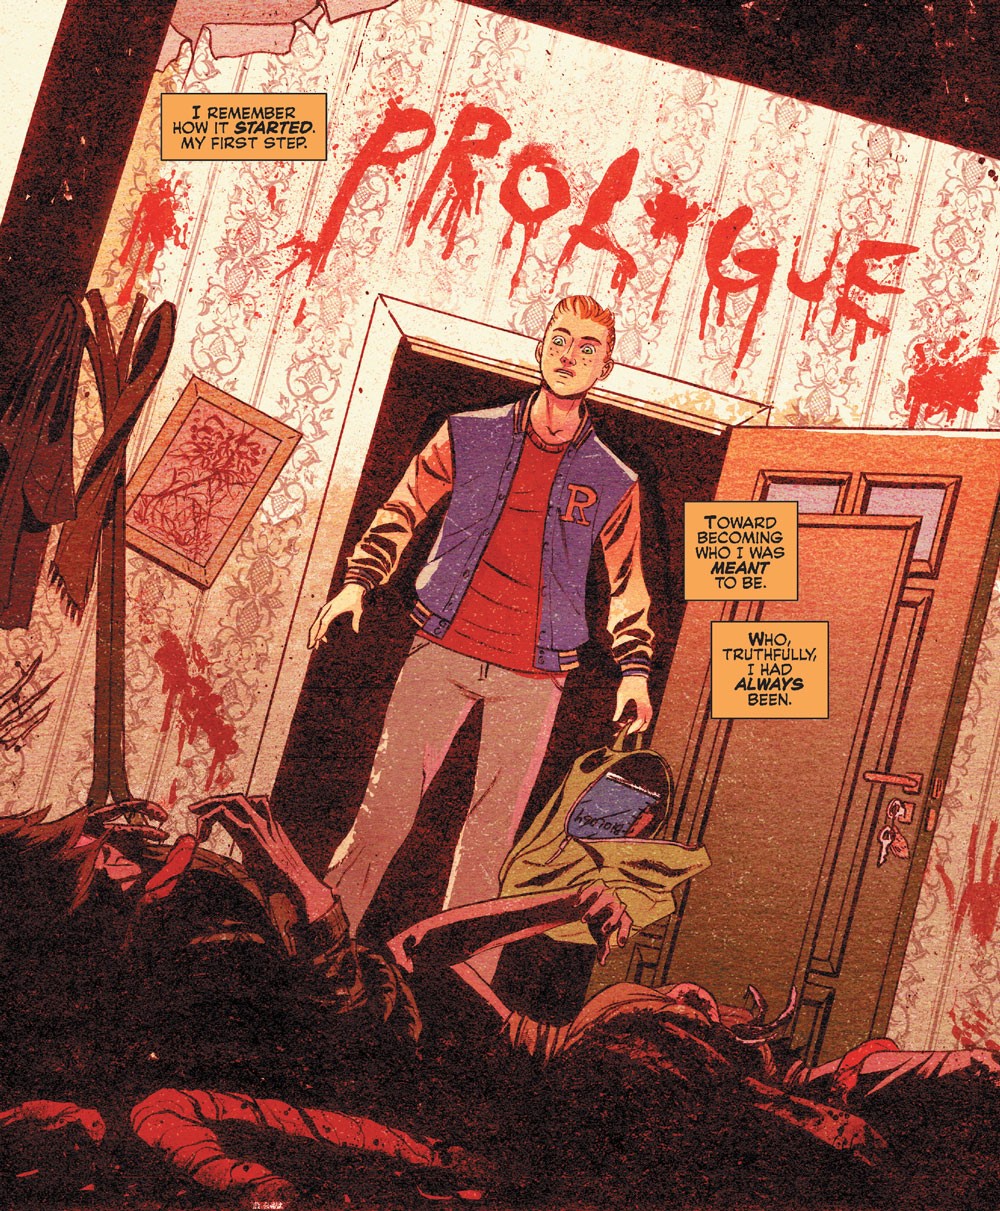 A panel from an Archie Comics story. Archie walks into a room with blood on the walls and obscured dead bodies in the foreground. His narrative text captions say he remembers how it all started, his first step towards becoming who he was meant to be.